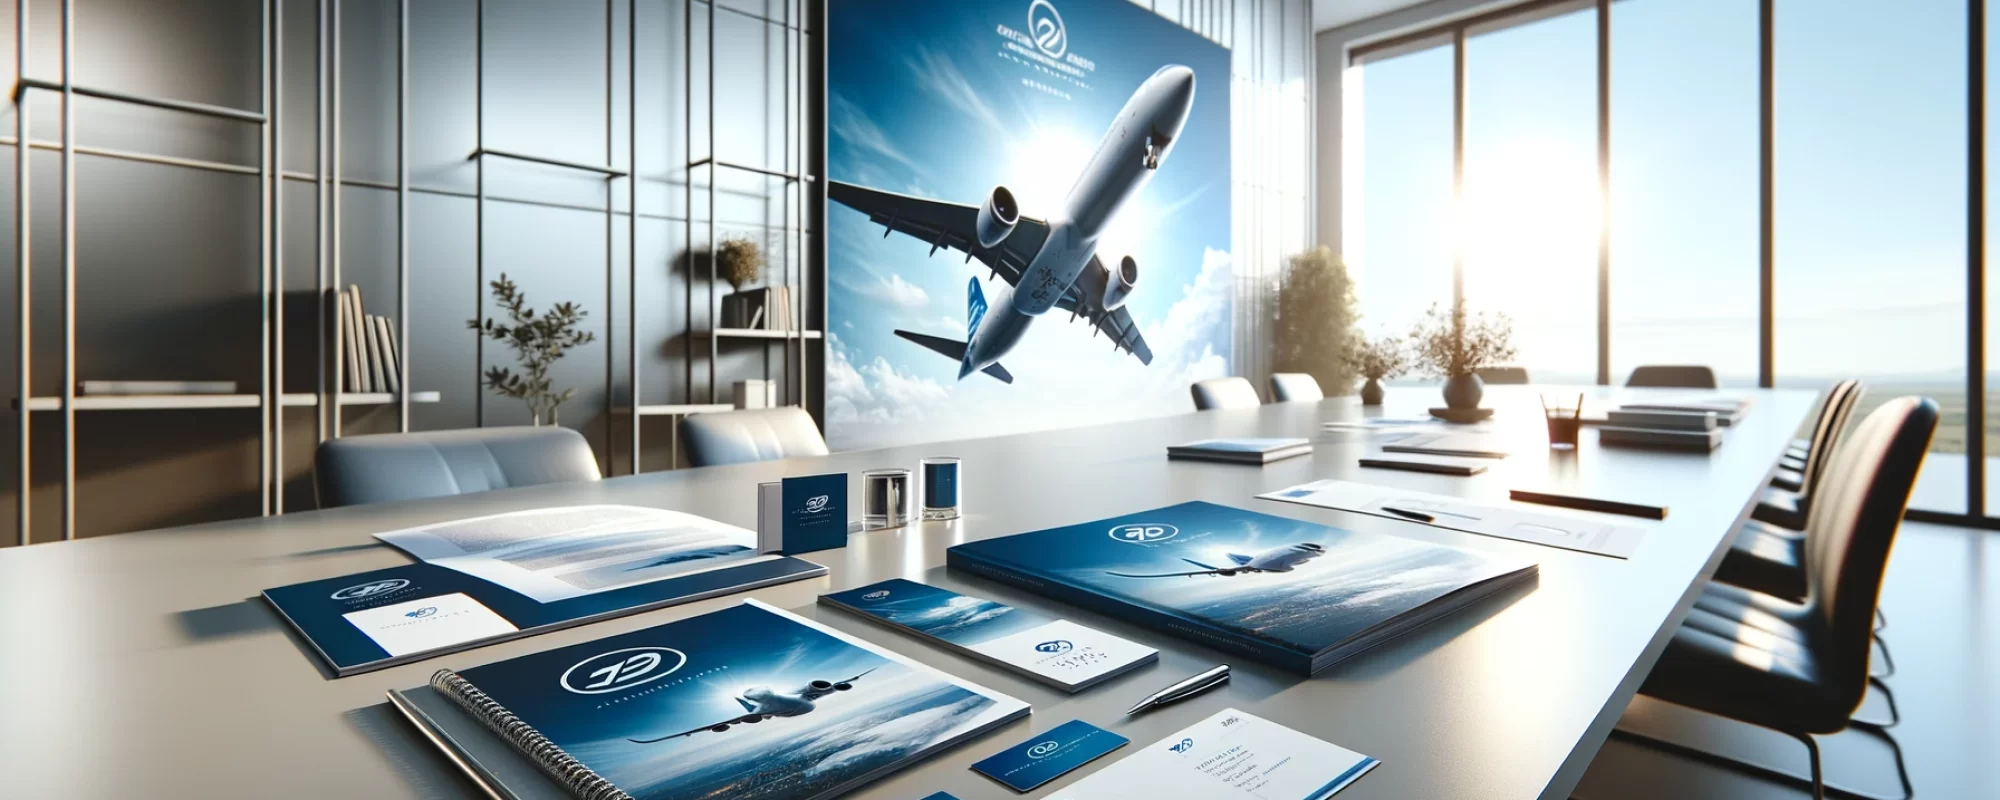 DALL·E 2024-02-18 18.51.47 - Create a wide, photorealistic image showcasing a simplified selection of marketing materials for an aviation company, focusing on fewer items for a cl